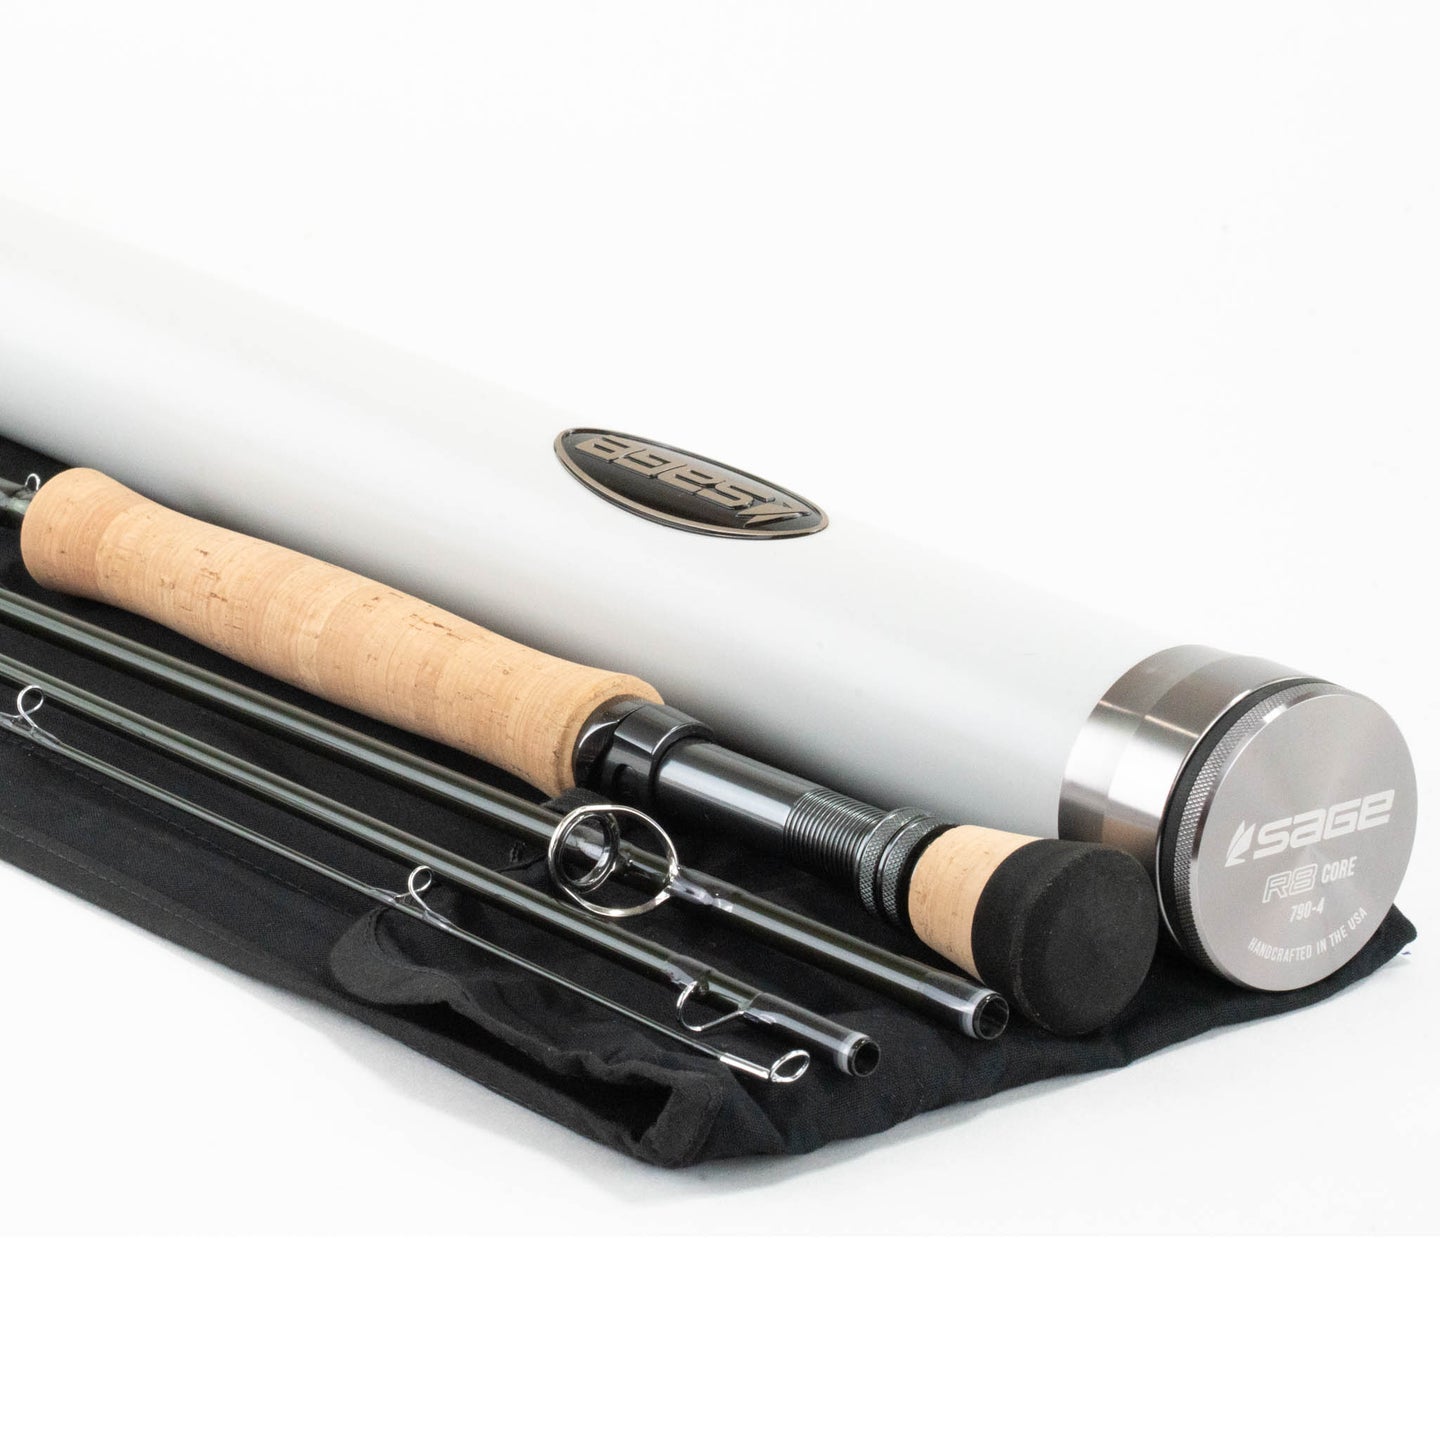 Sage R8 790-4 Fly Rod - 7wt 9ft 0in 4pc